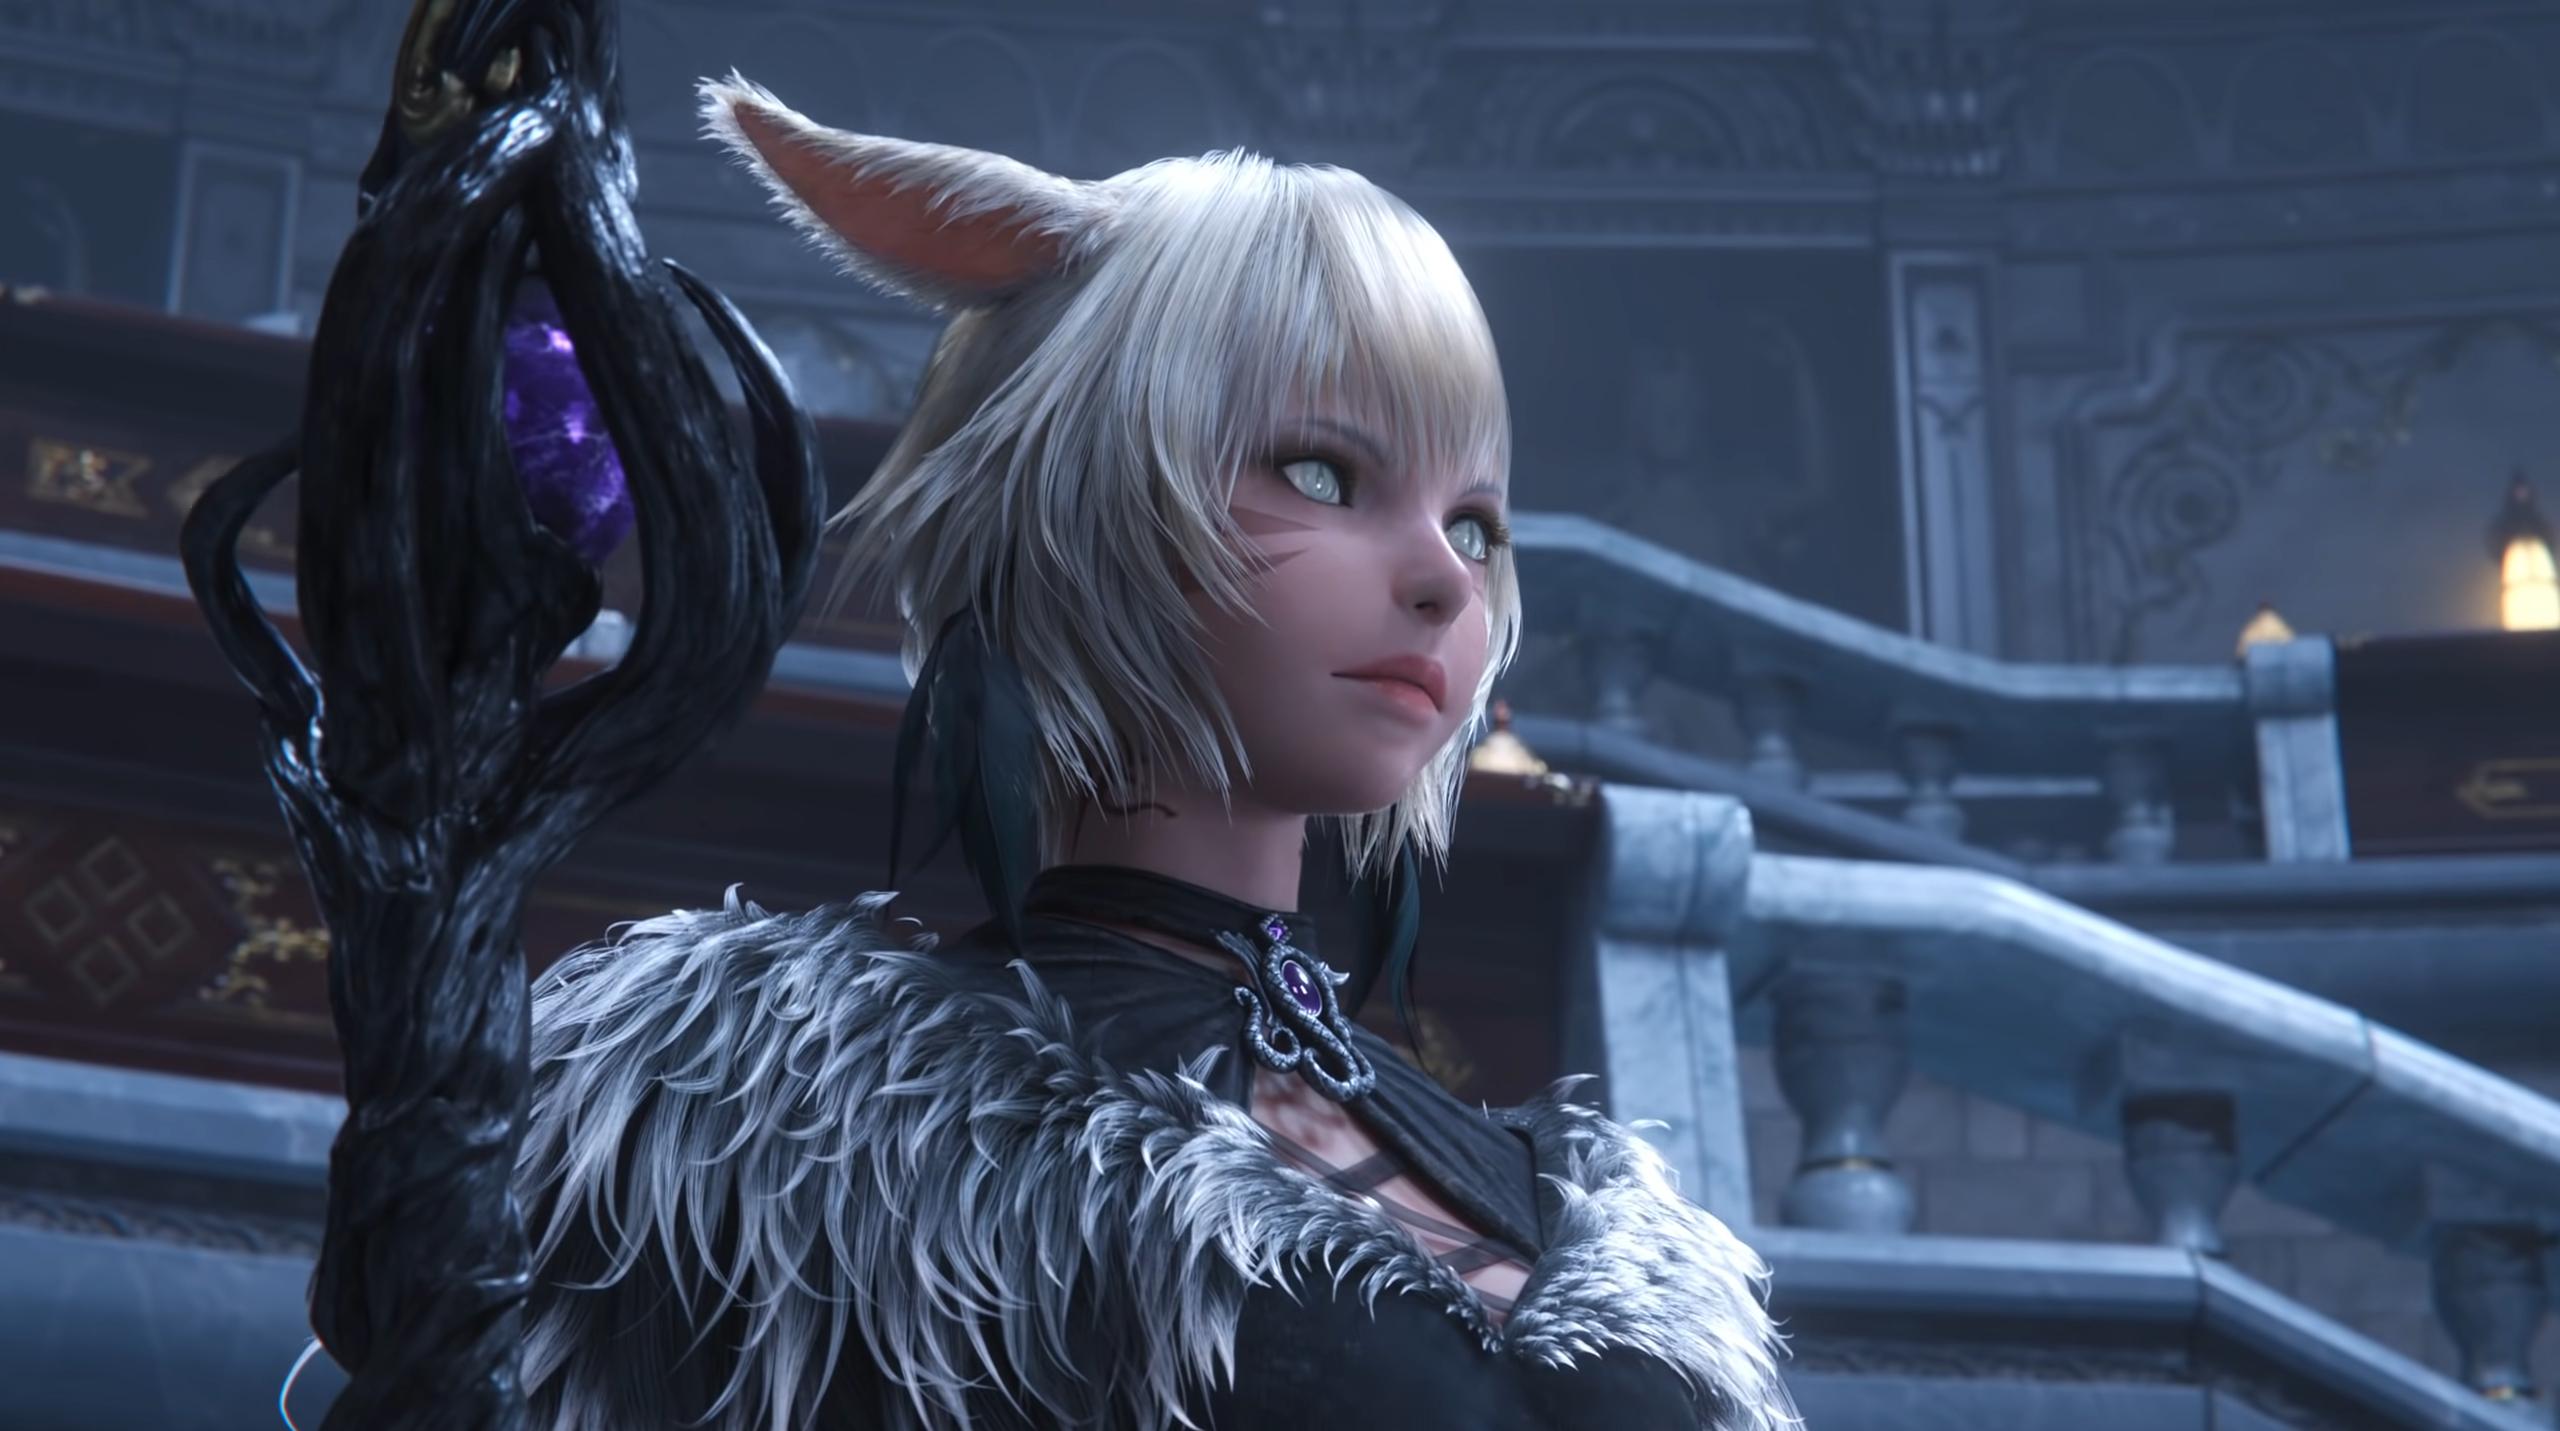 From new classes to bunny boys, here's what to expect in Final Fantasy 14: Endwalker